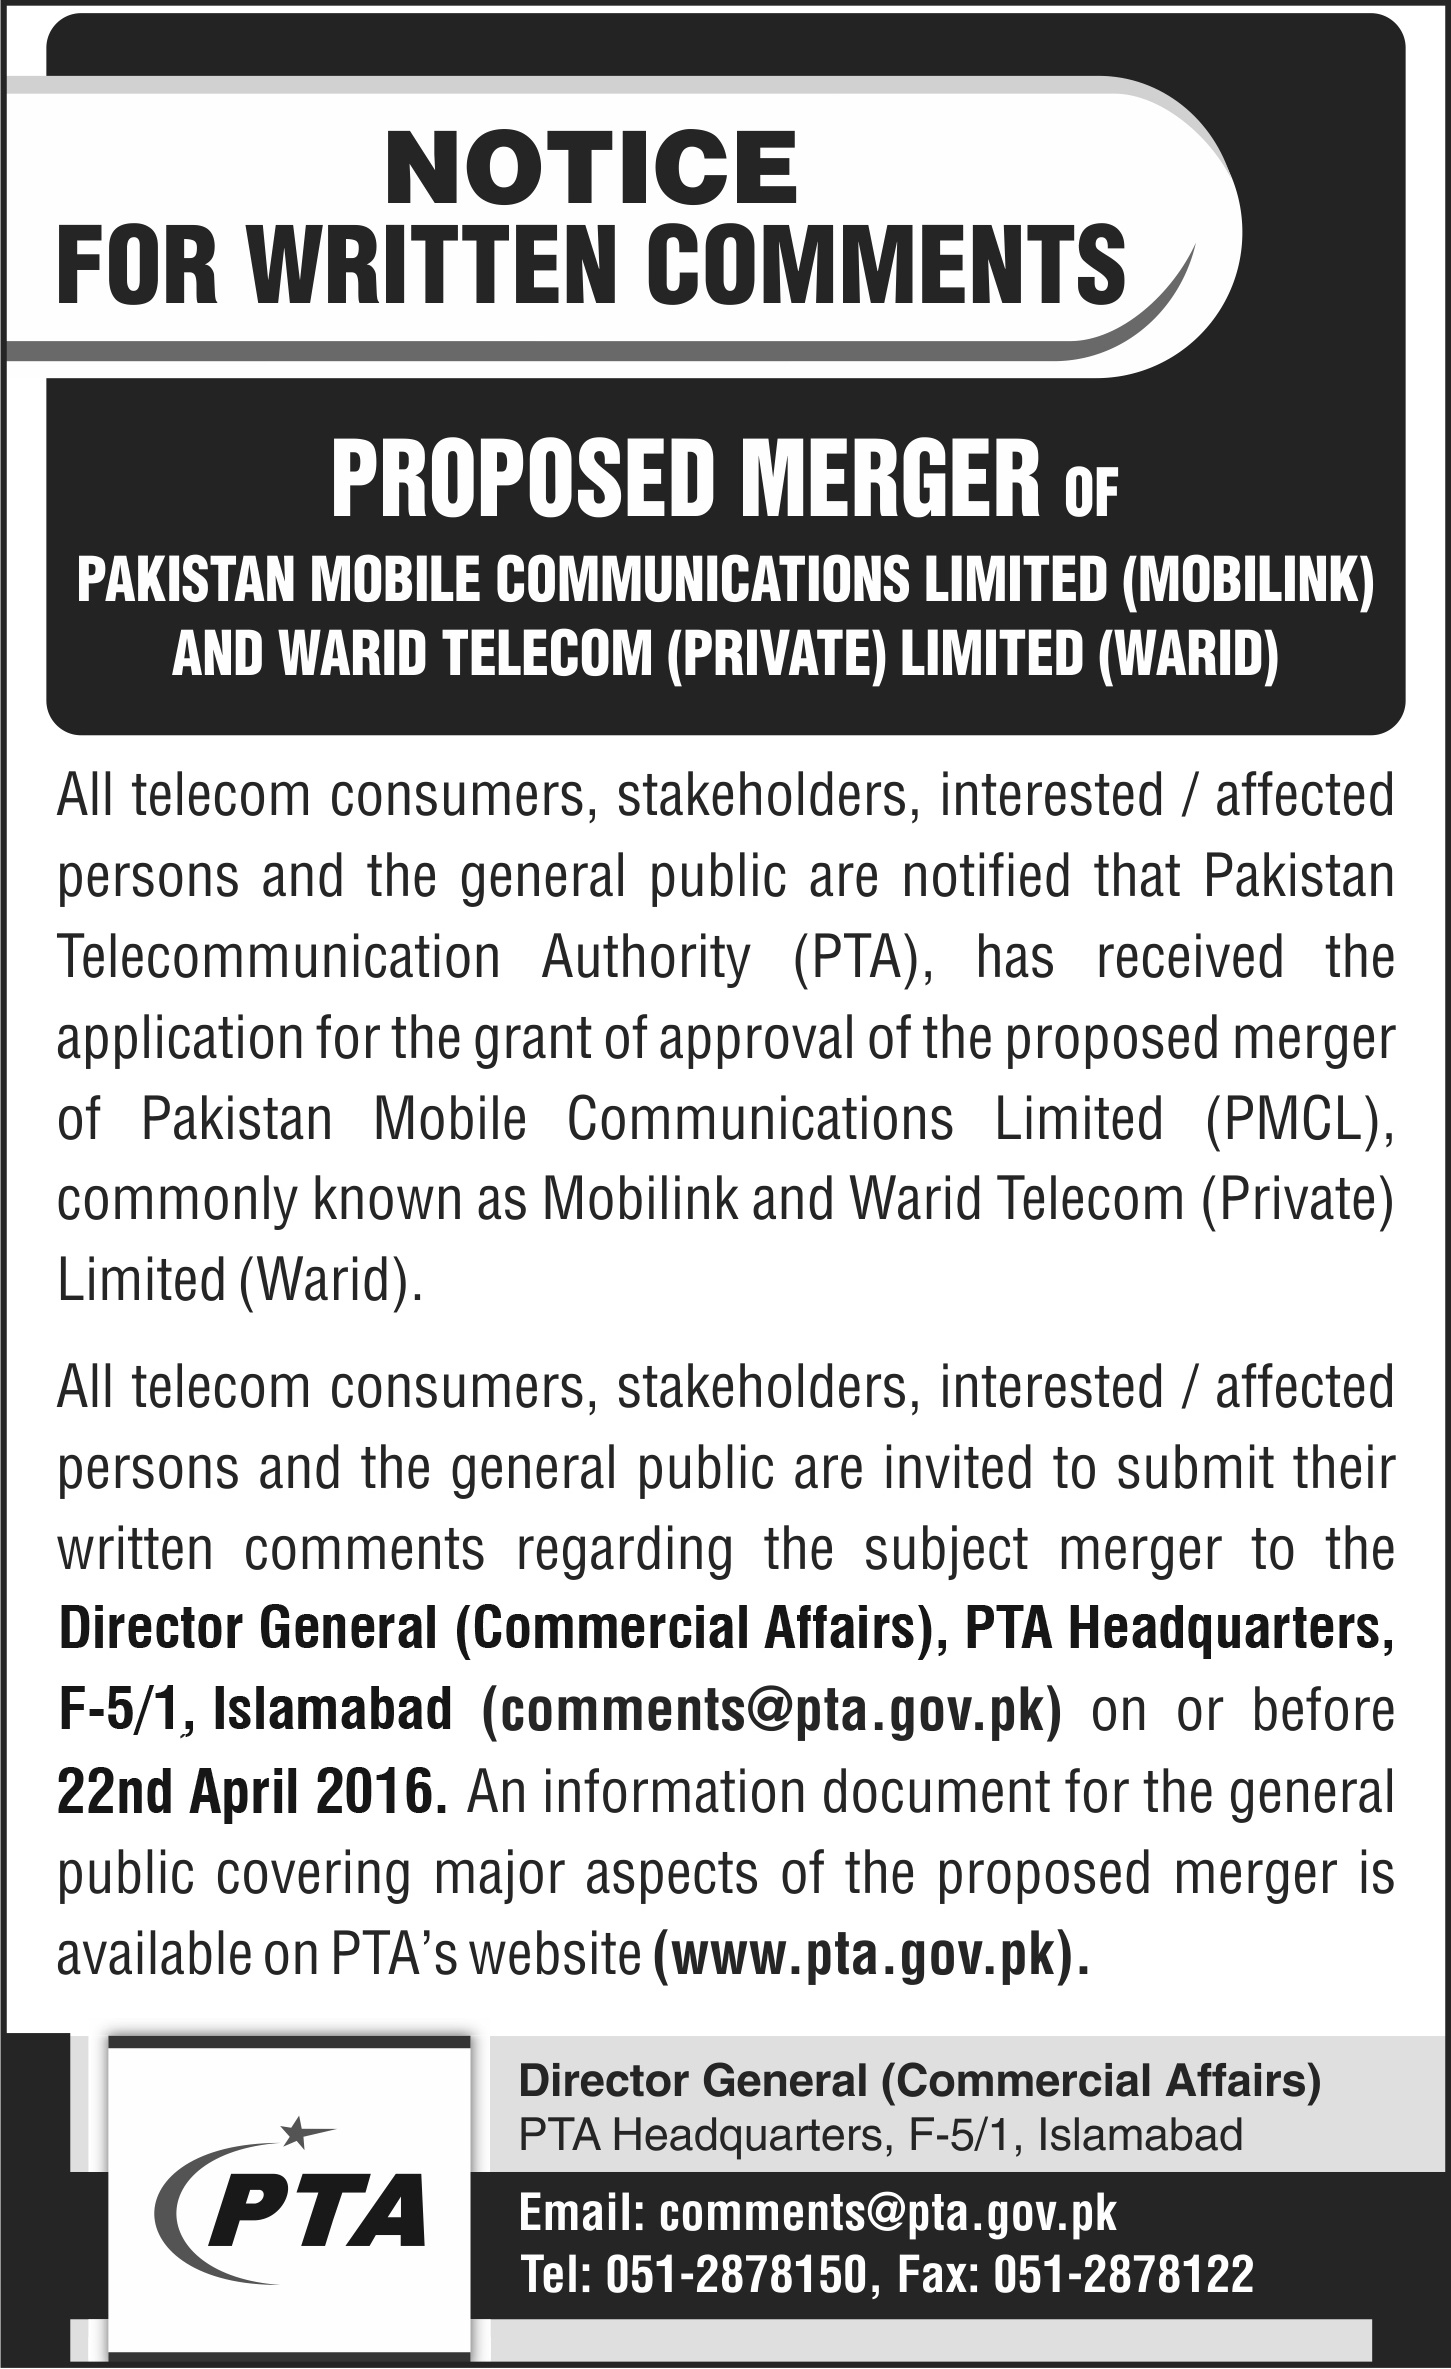 Proposed merger of Pakistan mobile comunications limited (mobilink) and warid telecom (private) limited (warid)m